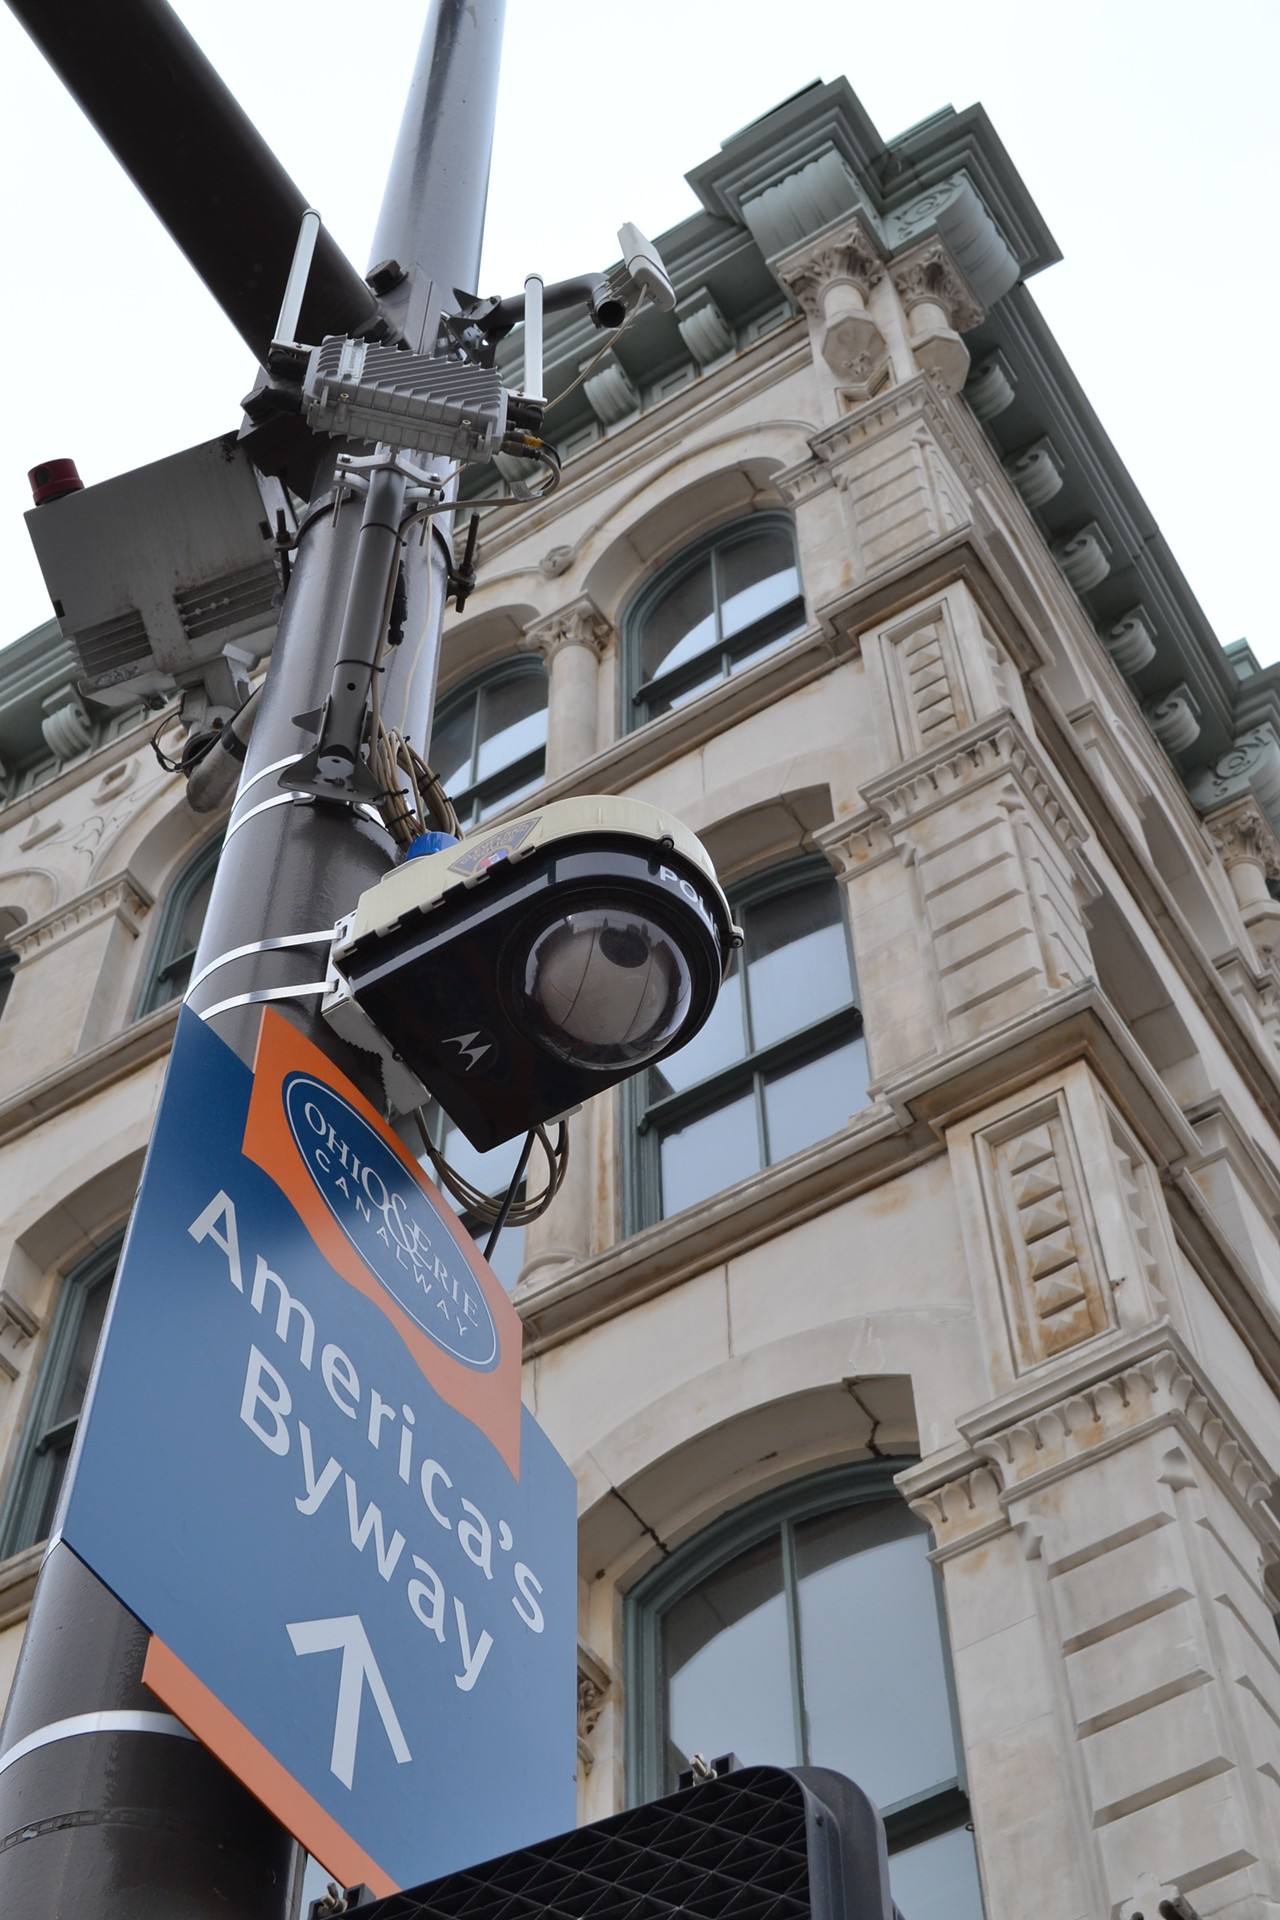 This surveillance camera on the corner of St. Clair and West Sixth caught the action below